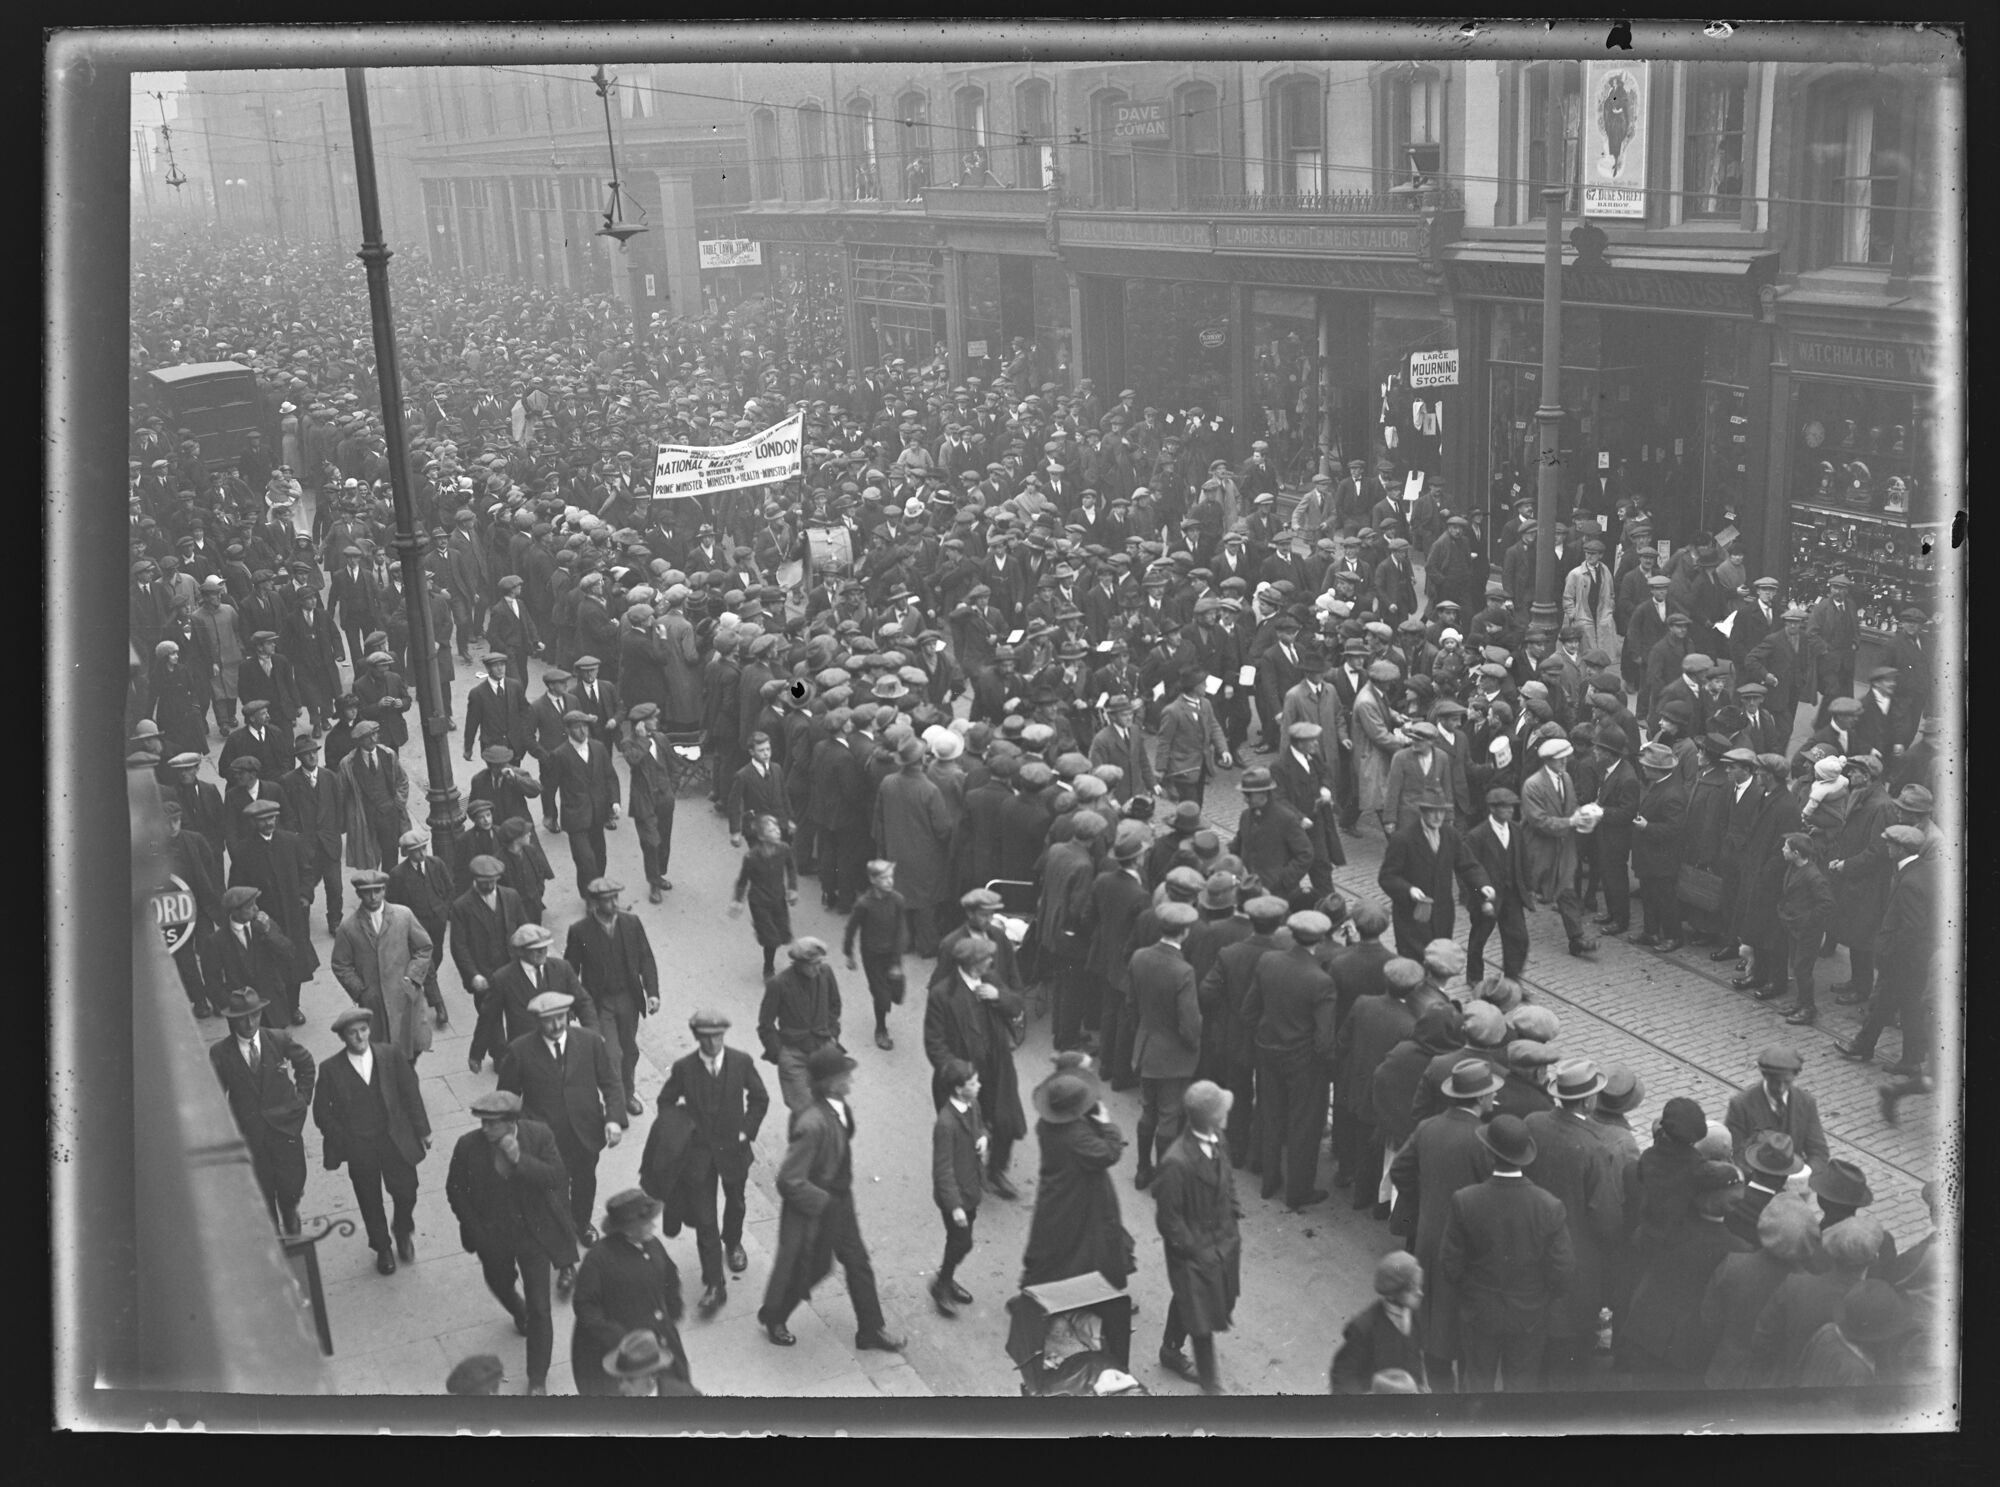 Unemployed March To London, Duke Street, Barrow-in-Furness